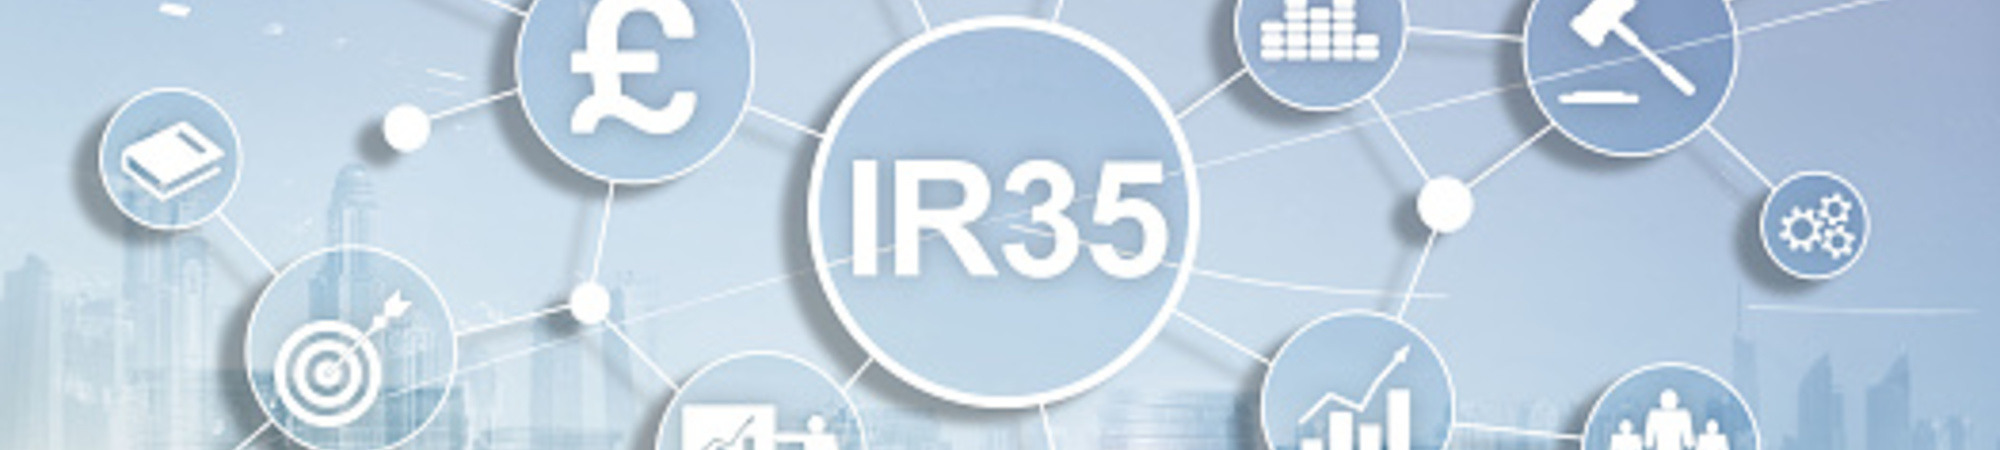 IR35 - Hiring Contractors we have it covered.